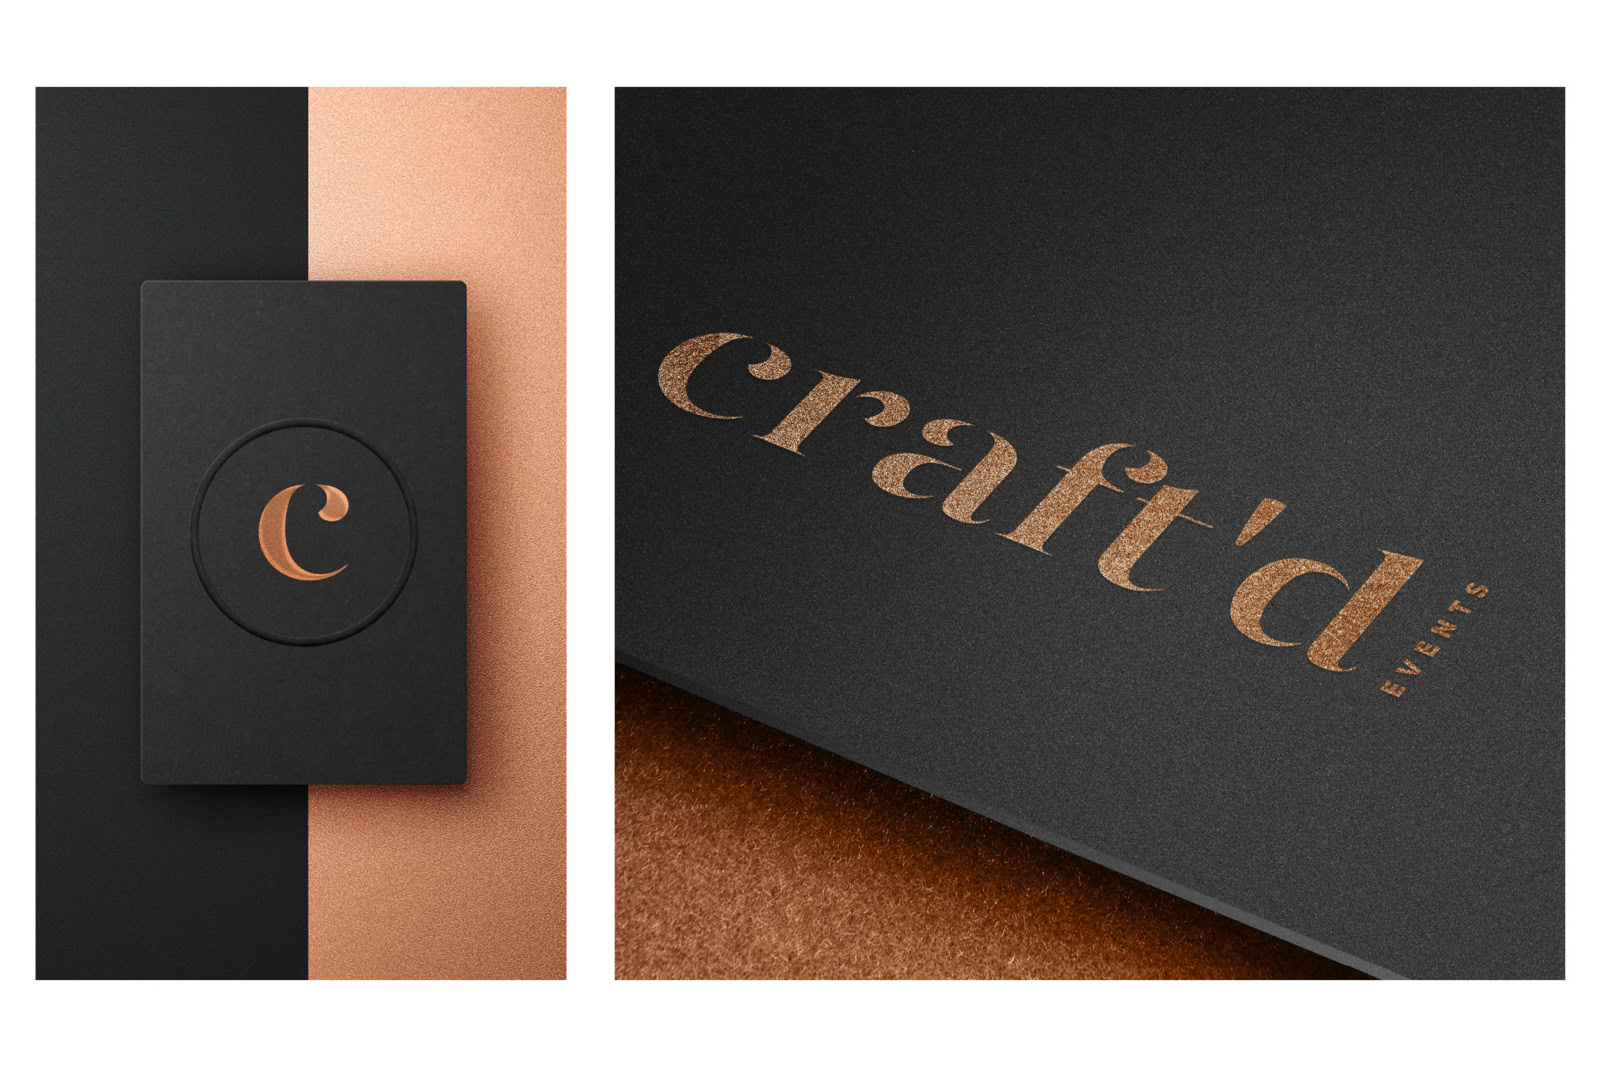 Craft'd Global branding as it appears on print collateral